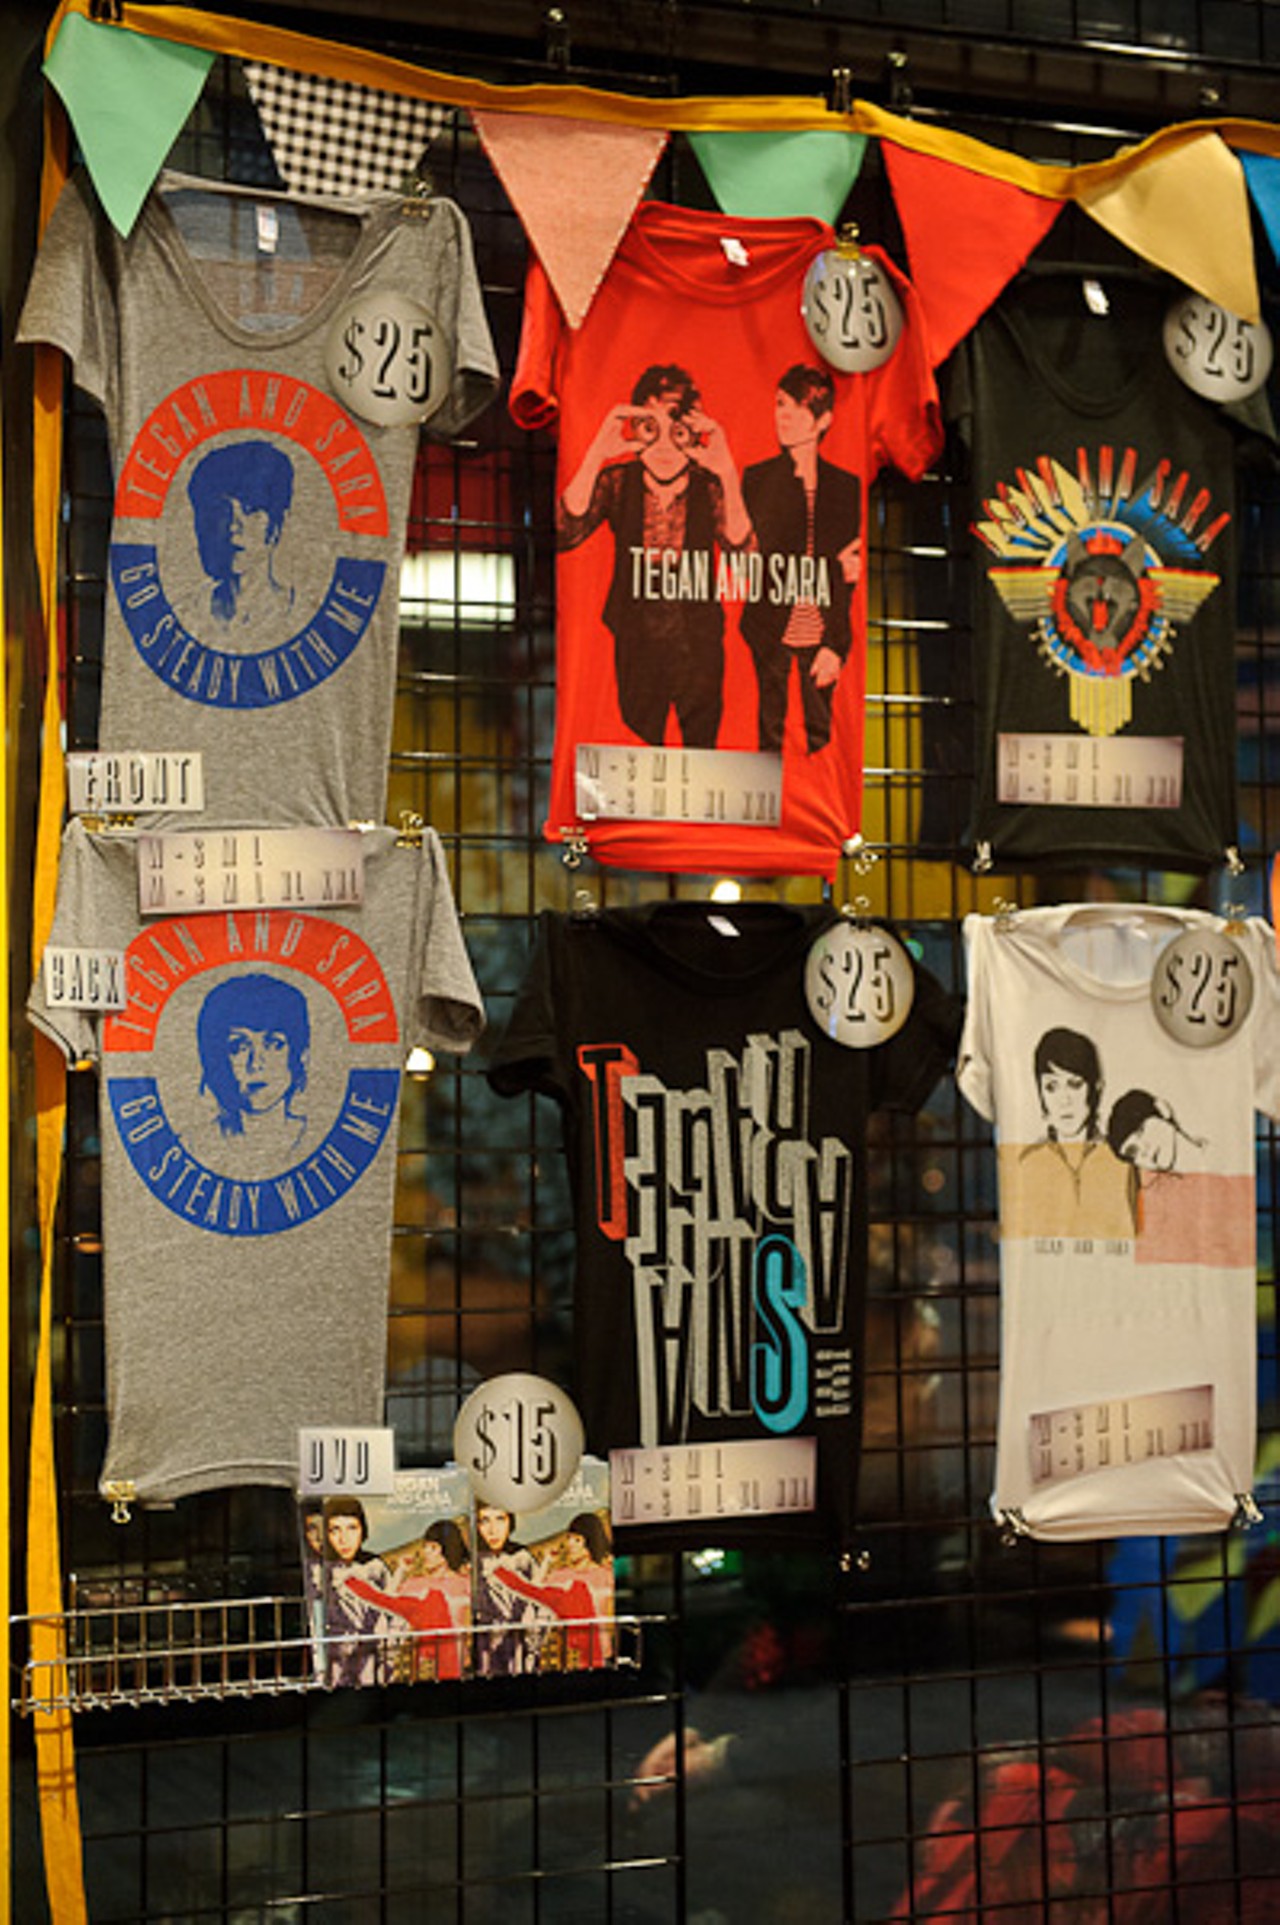 Tegan and Sara merch on April 2 at the Pageant.